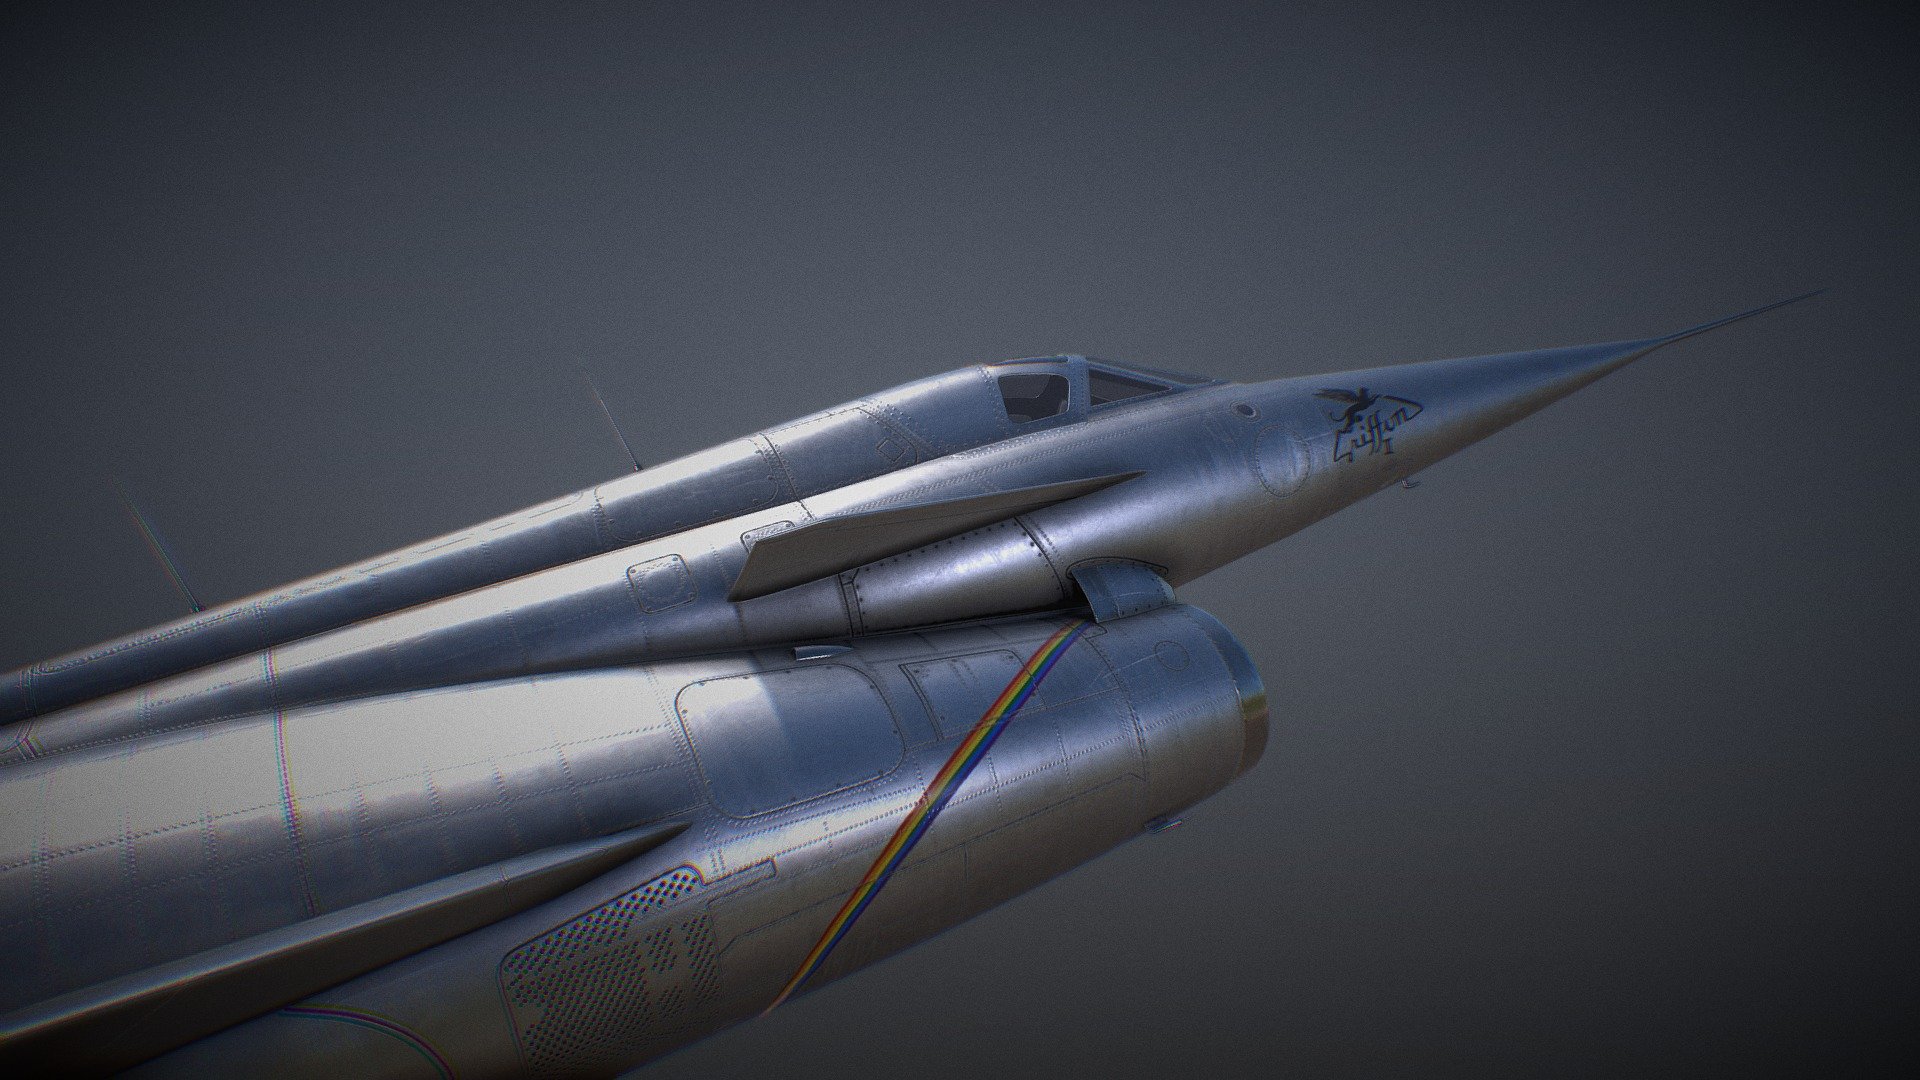 A model of the Nord 1500 Griffon 2 aircraft, a french Ramjet-powered prototype from 1955 - Griffon - 3D model by ptibogvader 3d model